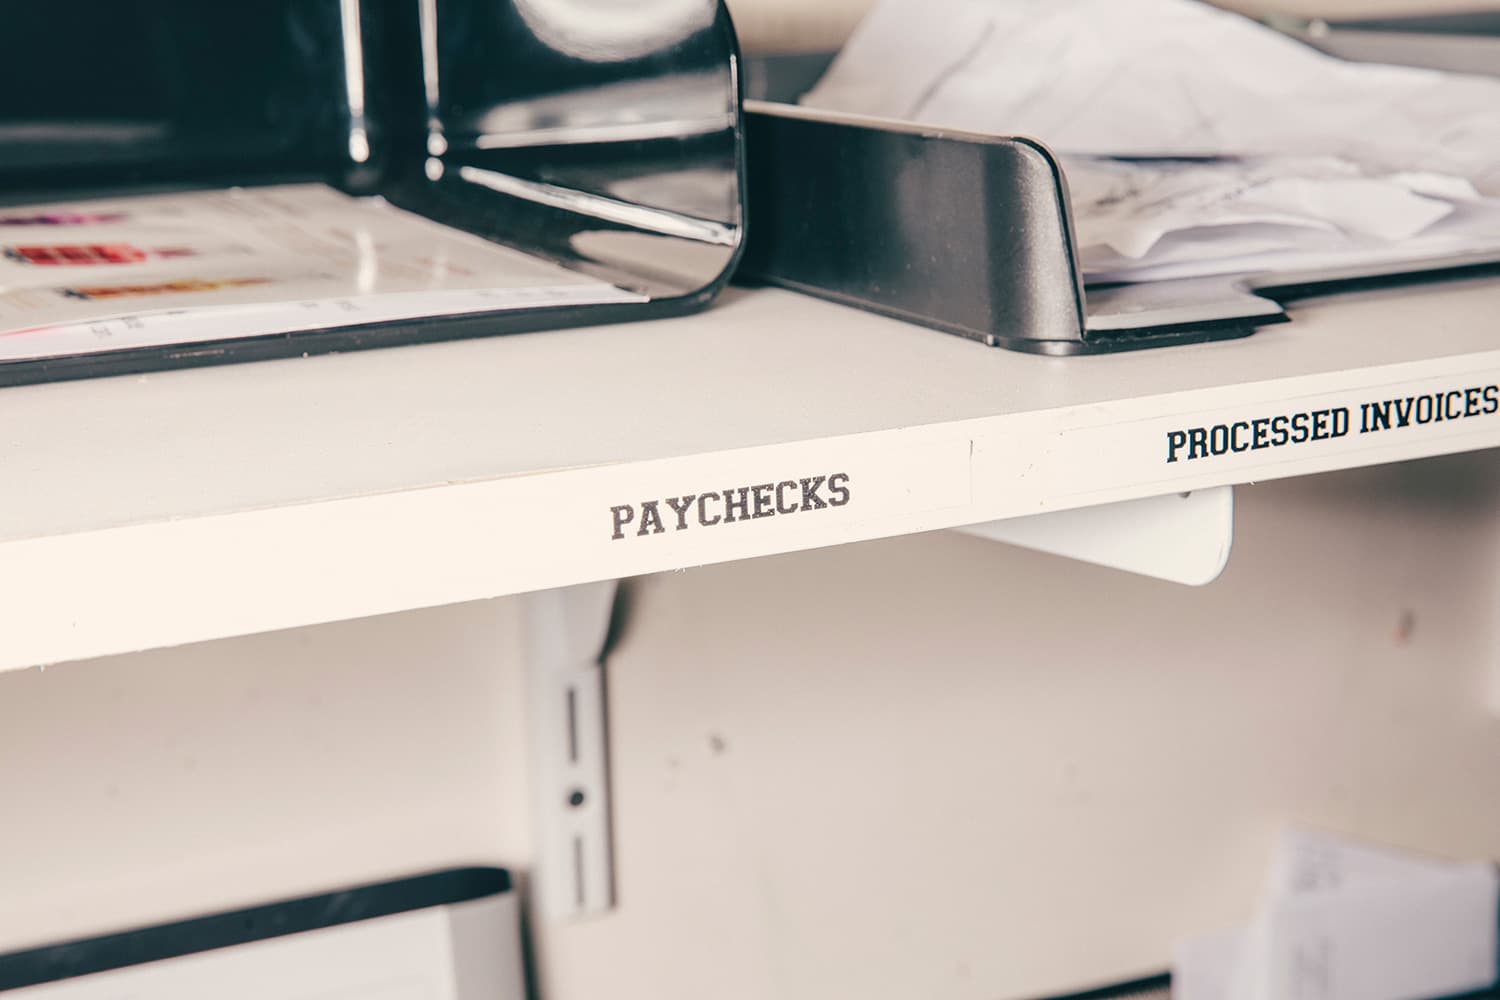 Shelf labelled "Paychecks" and "Processed Invoices"